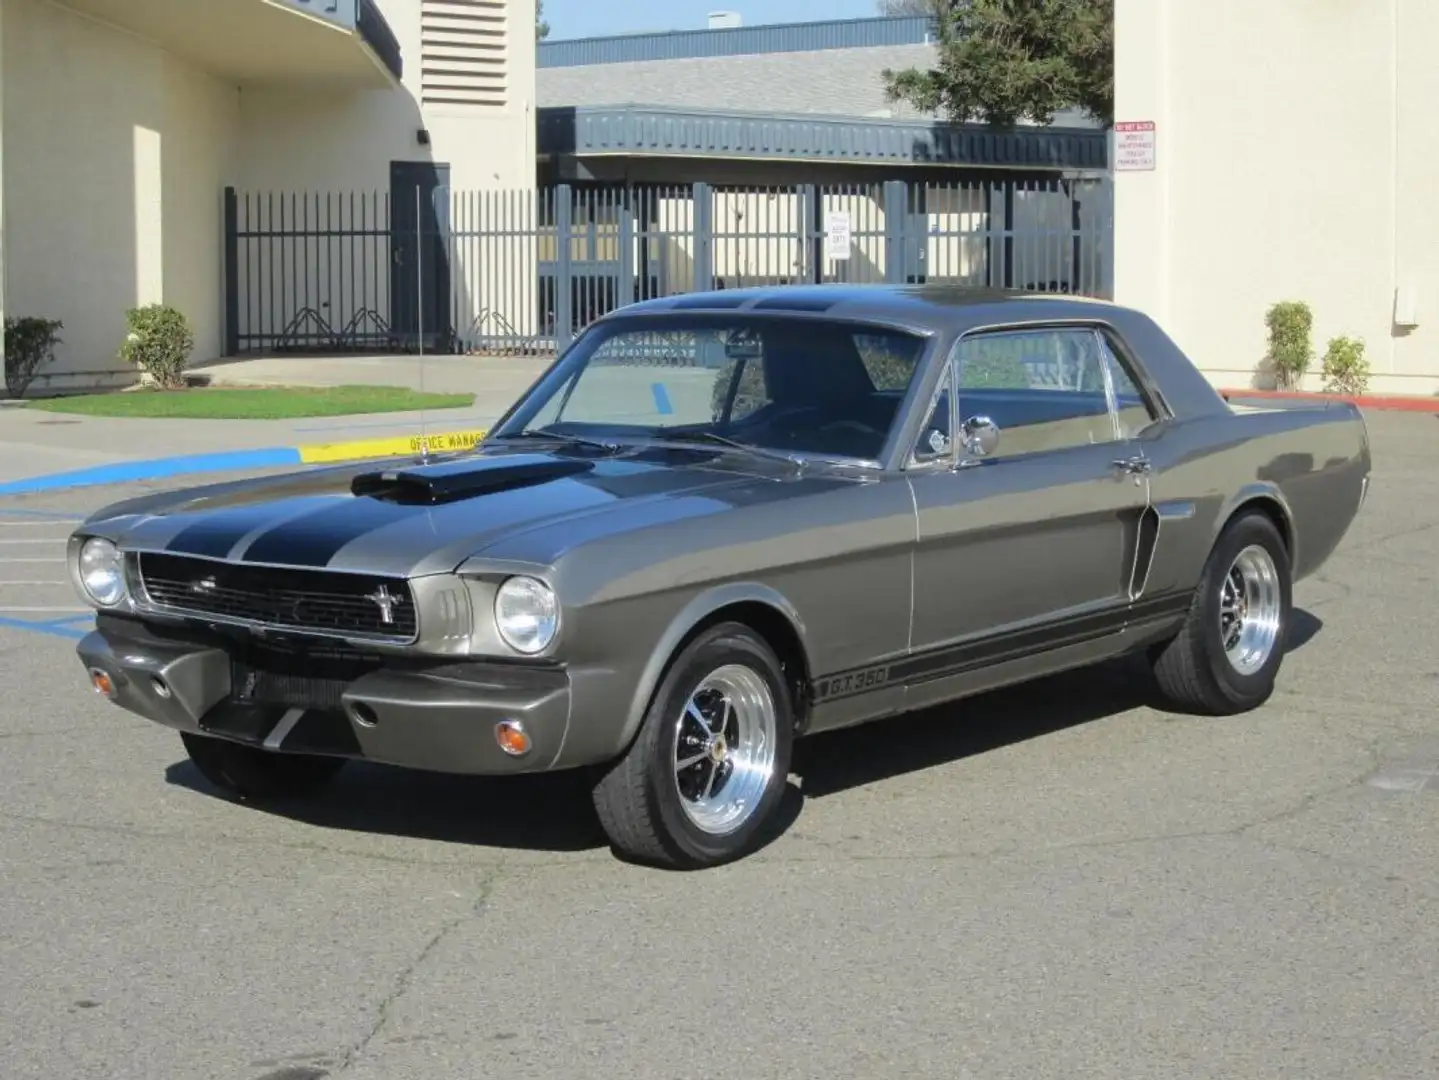 Ford Mustang Coupe. "Shelby GT350" - 1